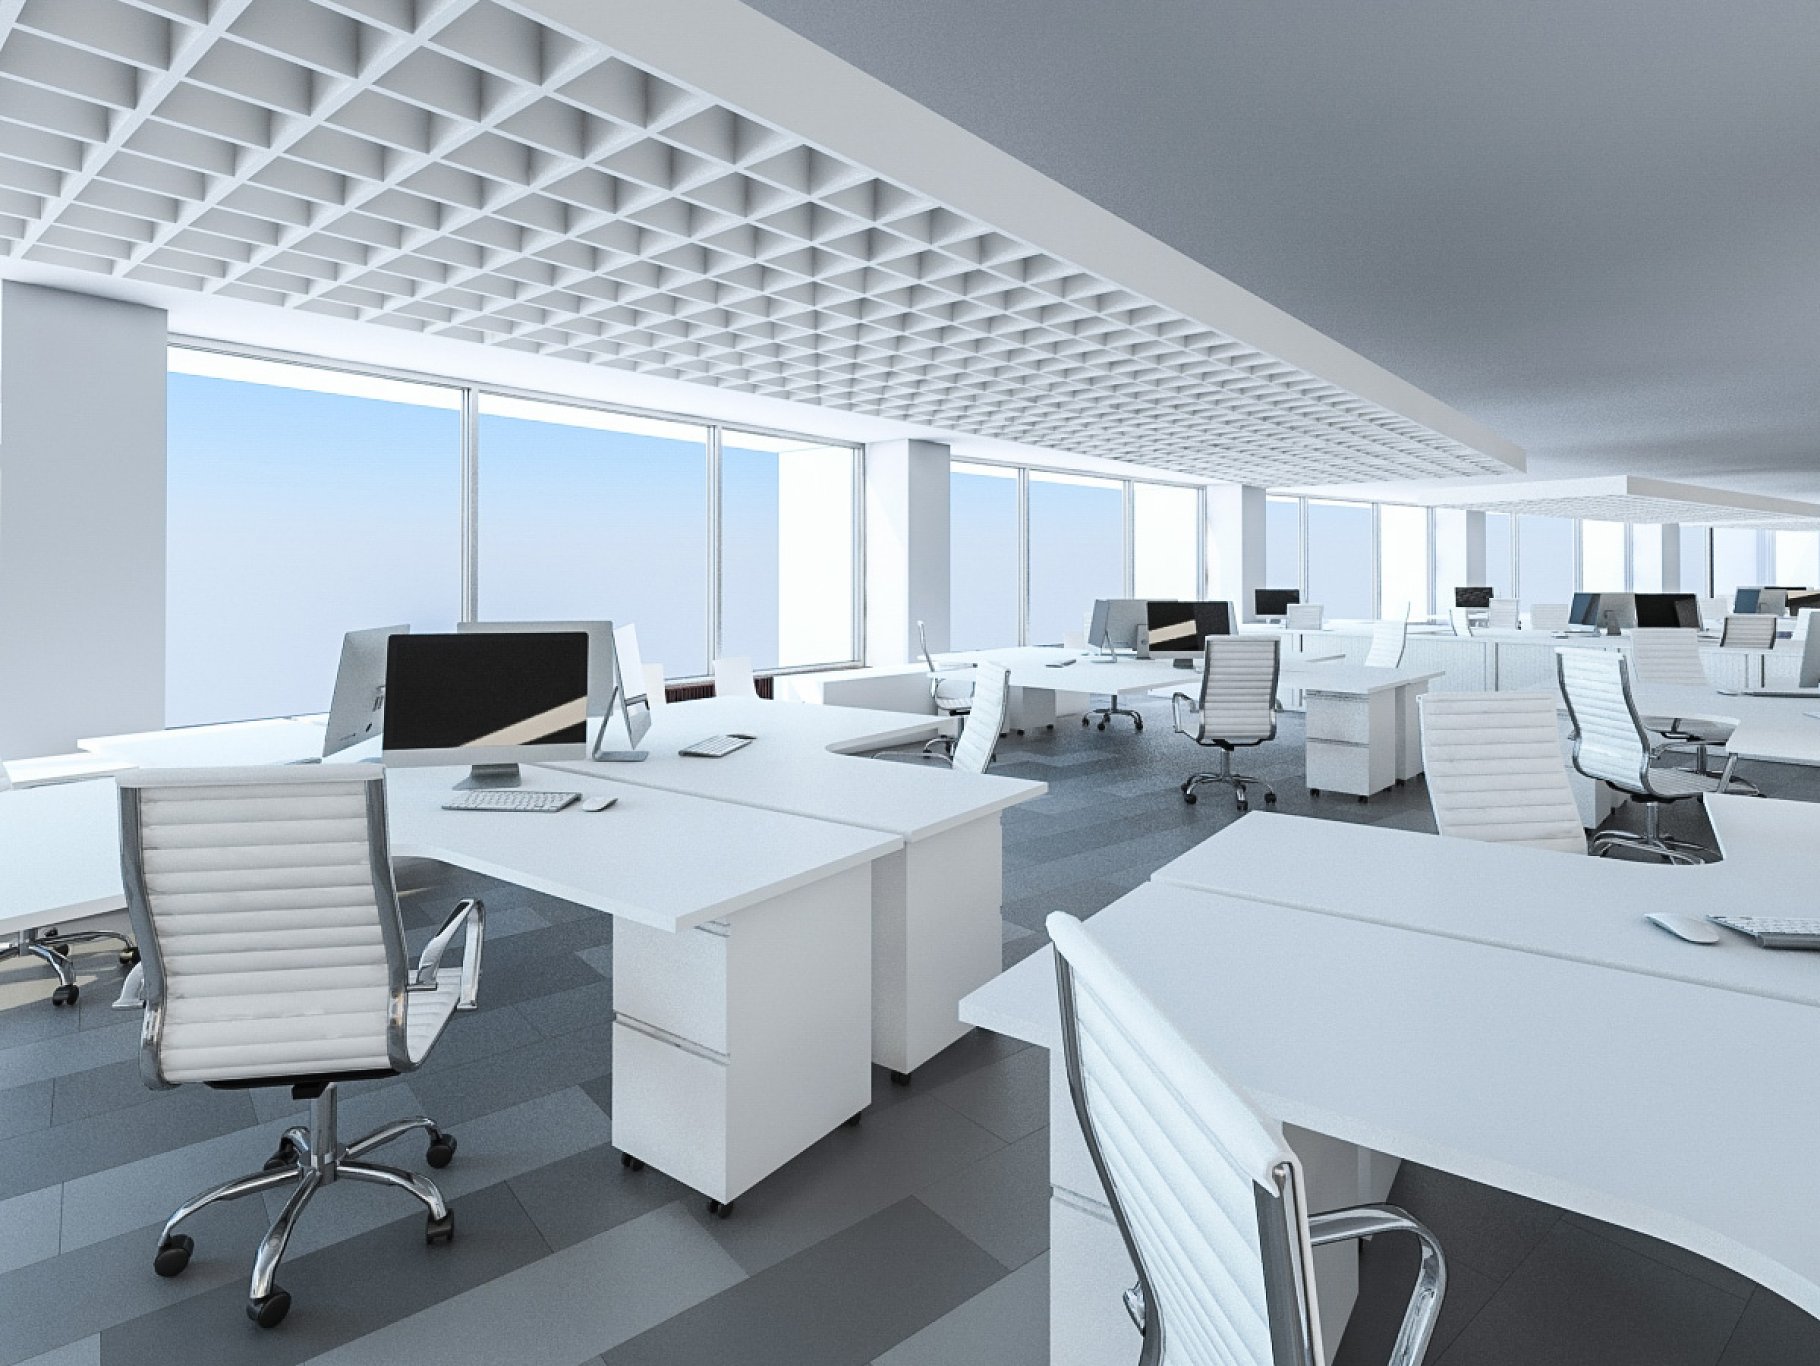 Rendering a unique 3d model of an office interior